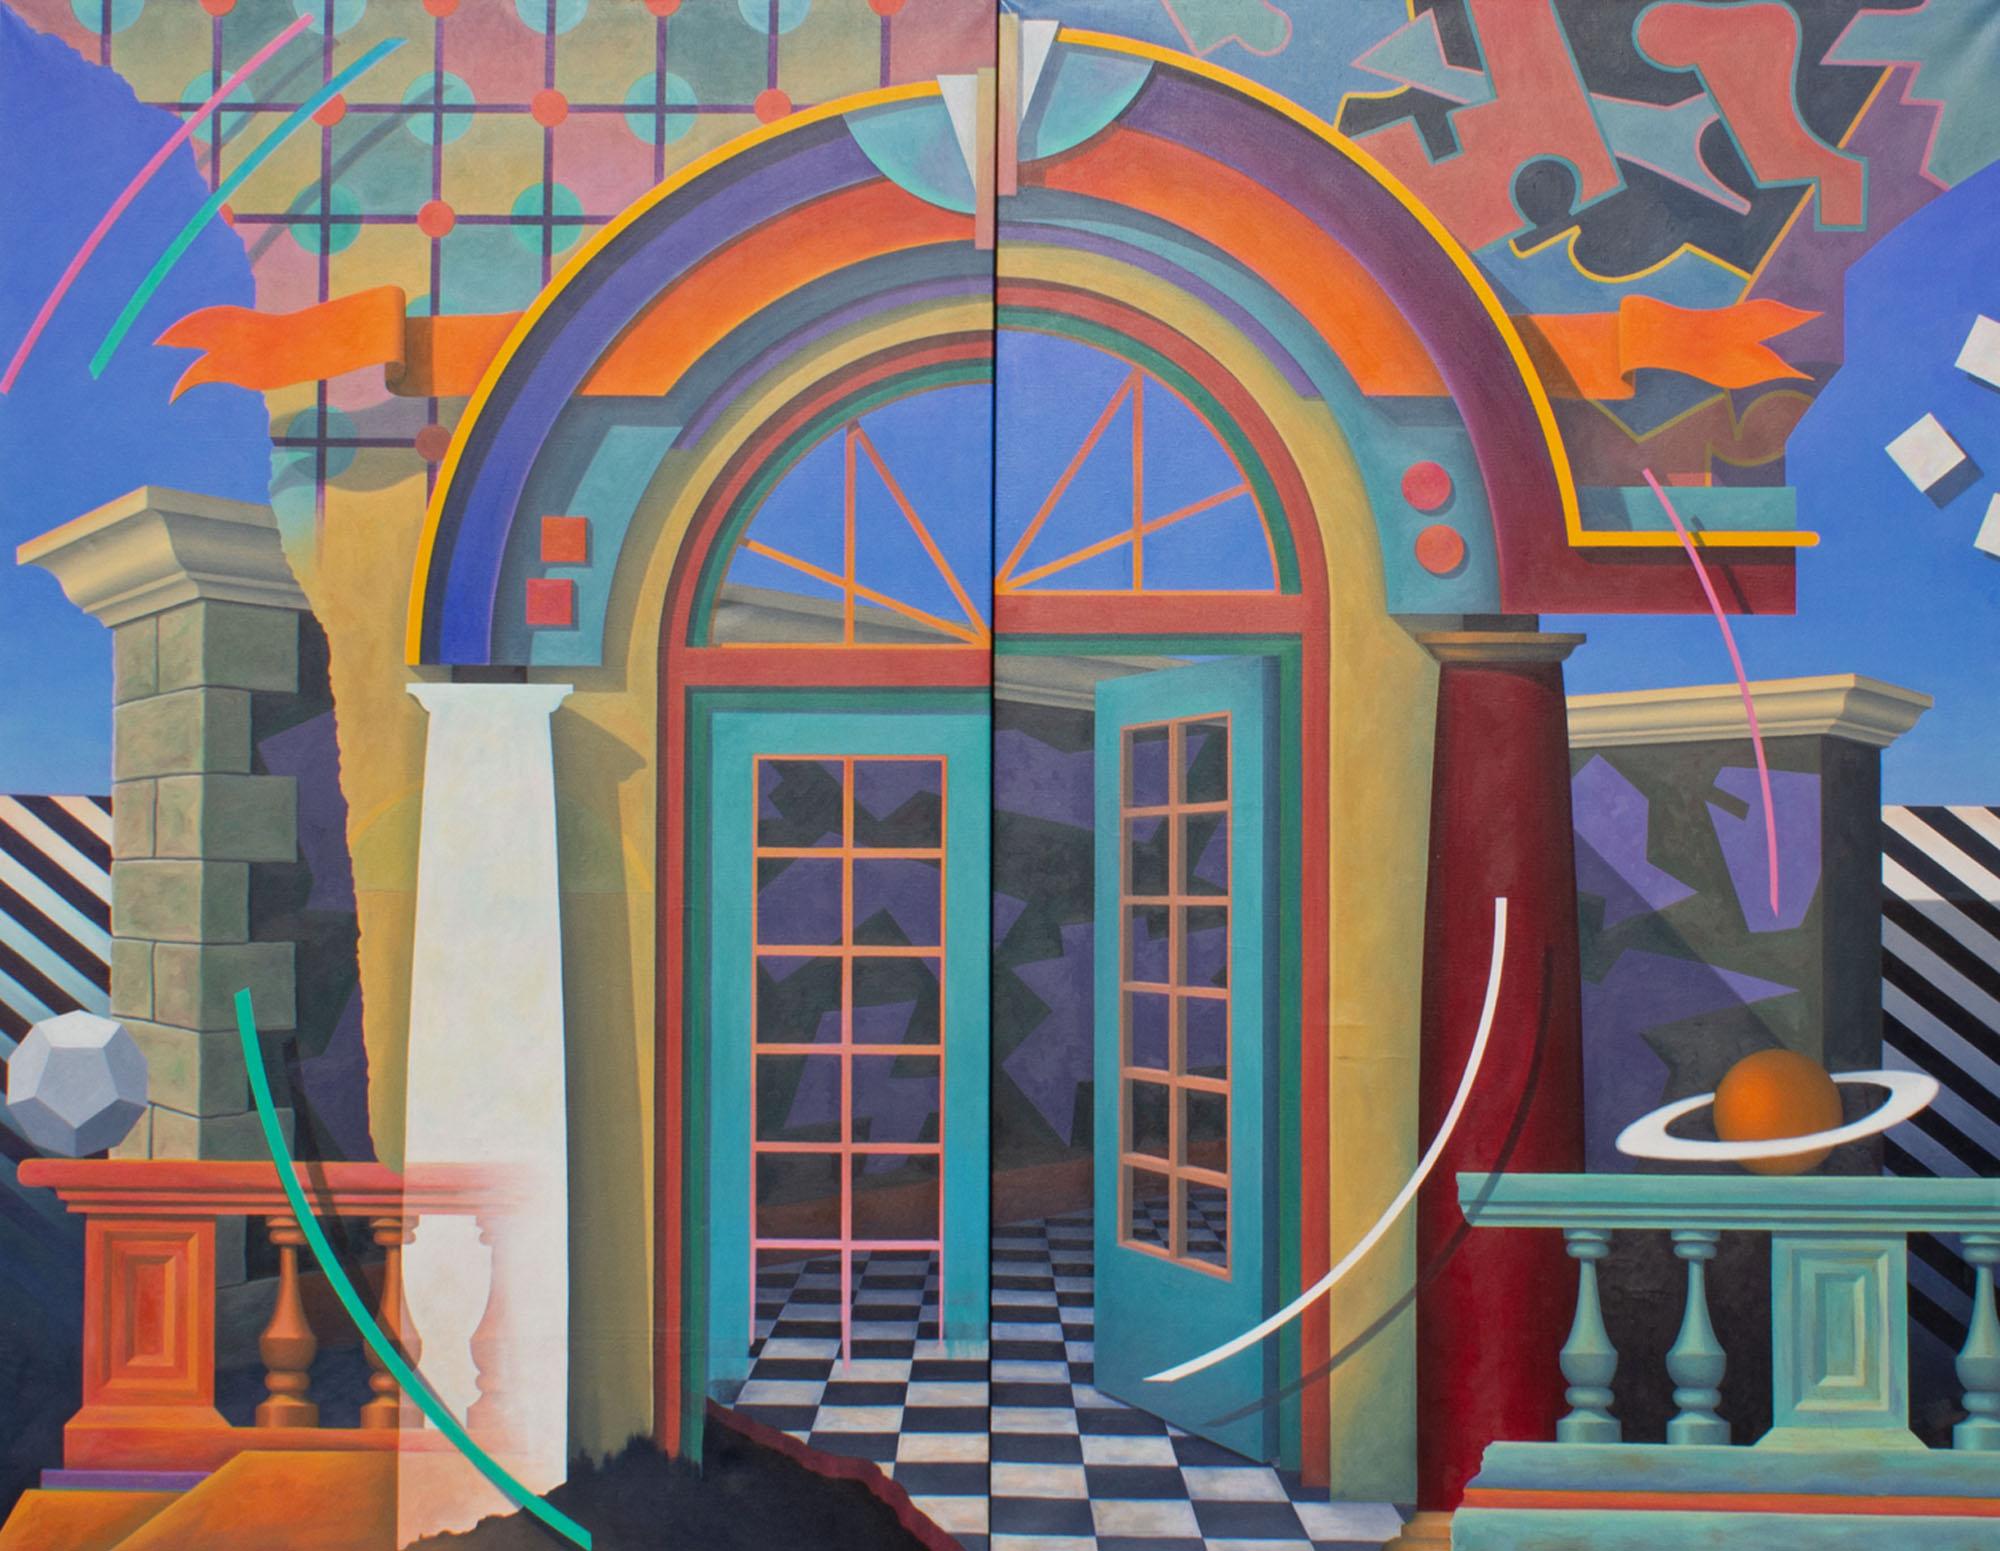 A 1992 monumental acrylic on canvas diptych painting by the American artist Kim Krause. Painted on two panels and titled Kepler/Paradox #1, ﻿this Postmodern work depicts a vibrant archway with teal and orange doors below. The arch is flanked by